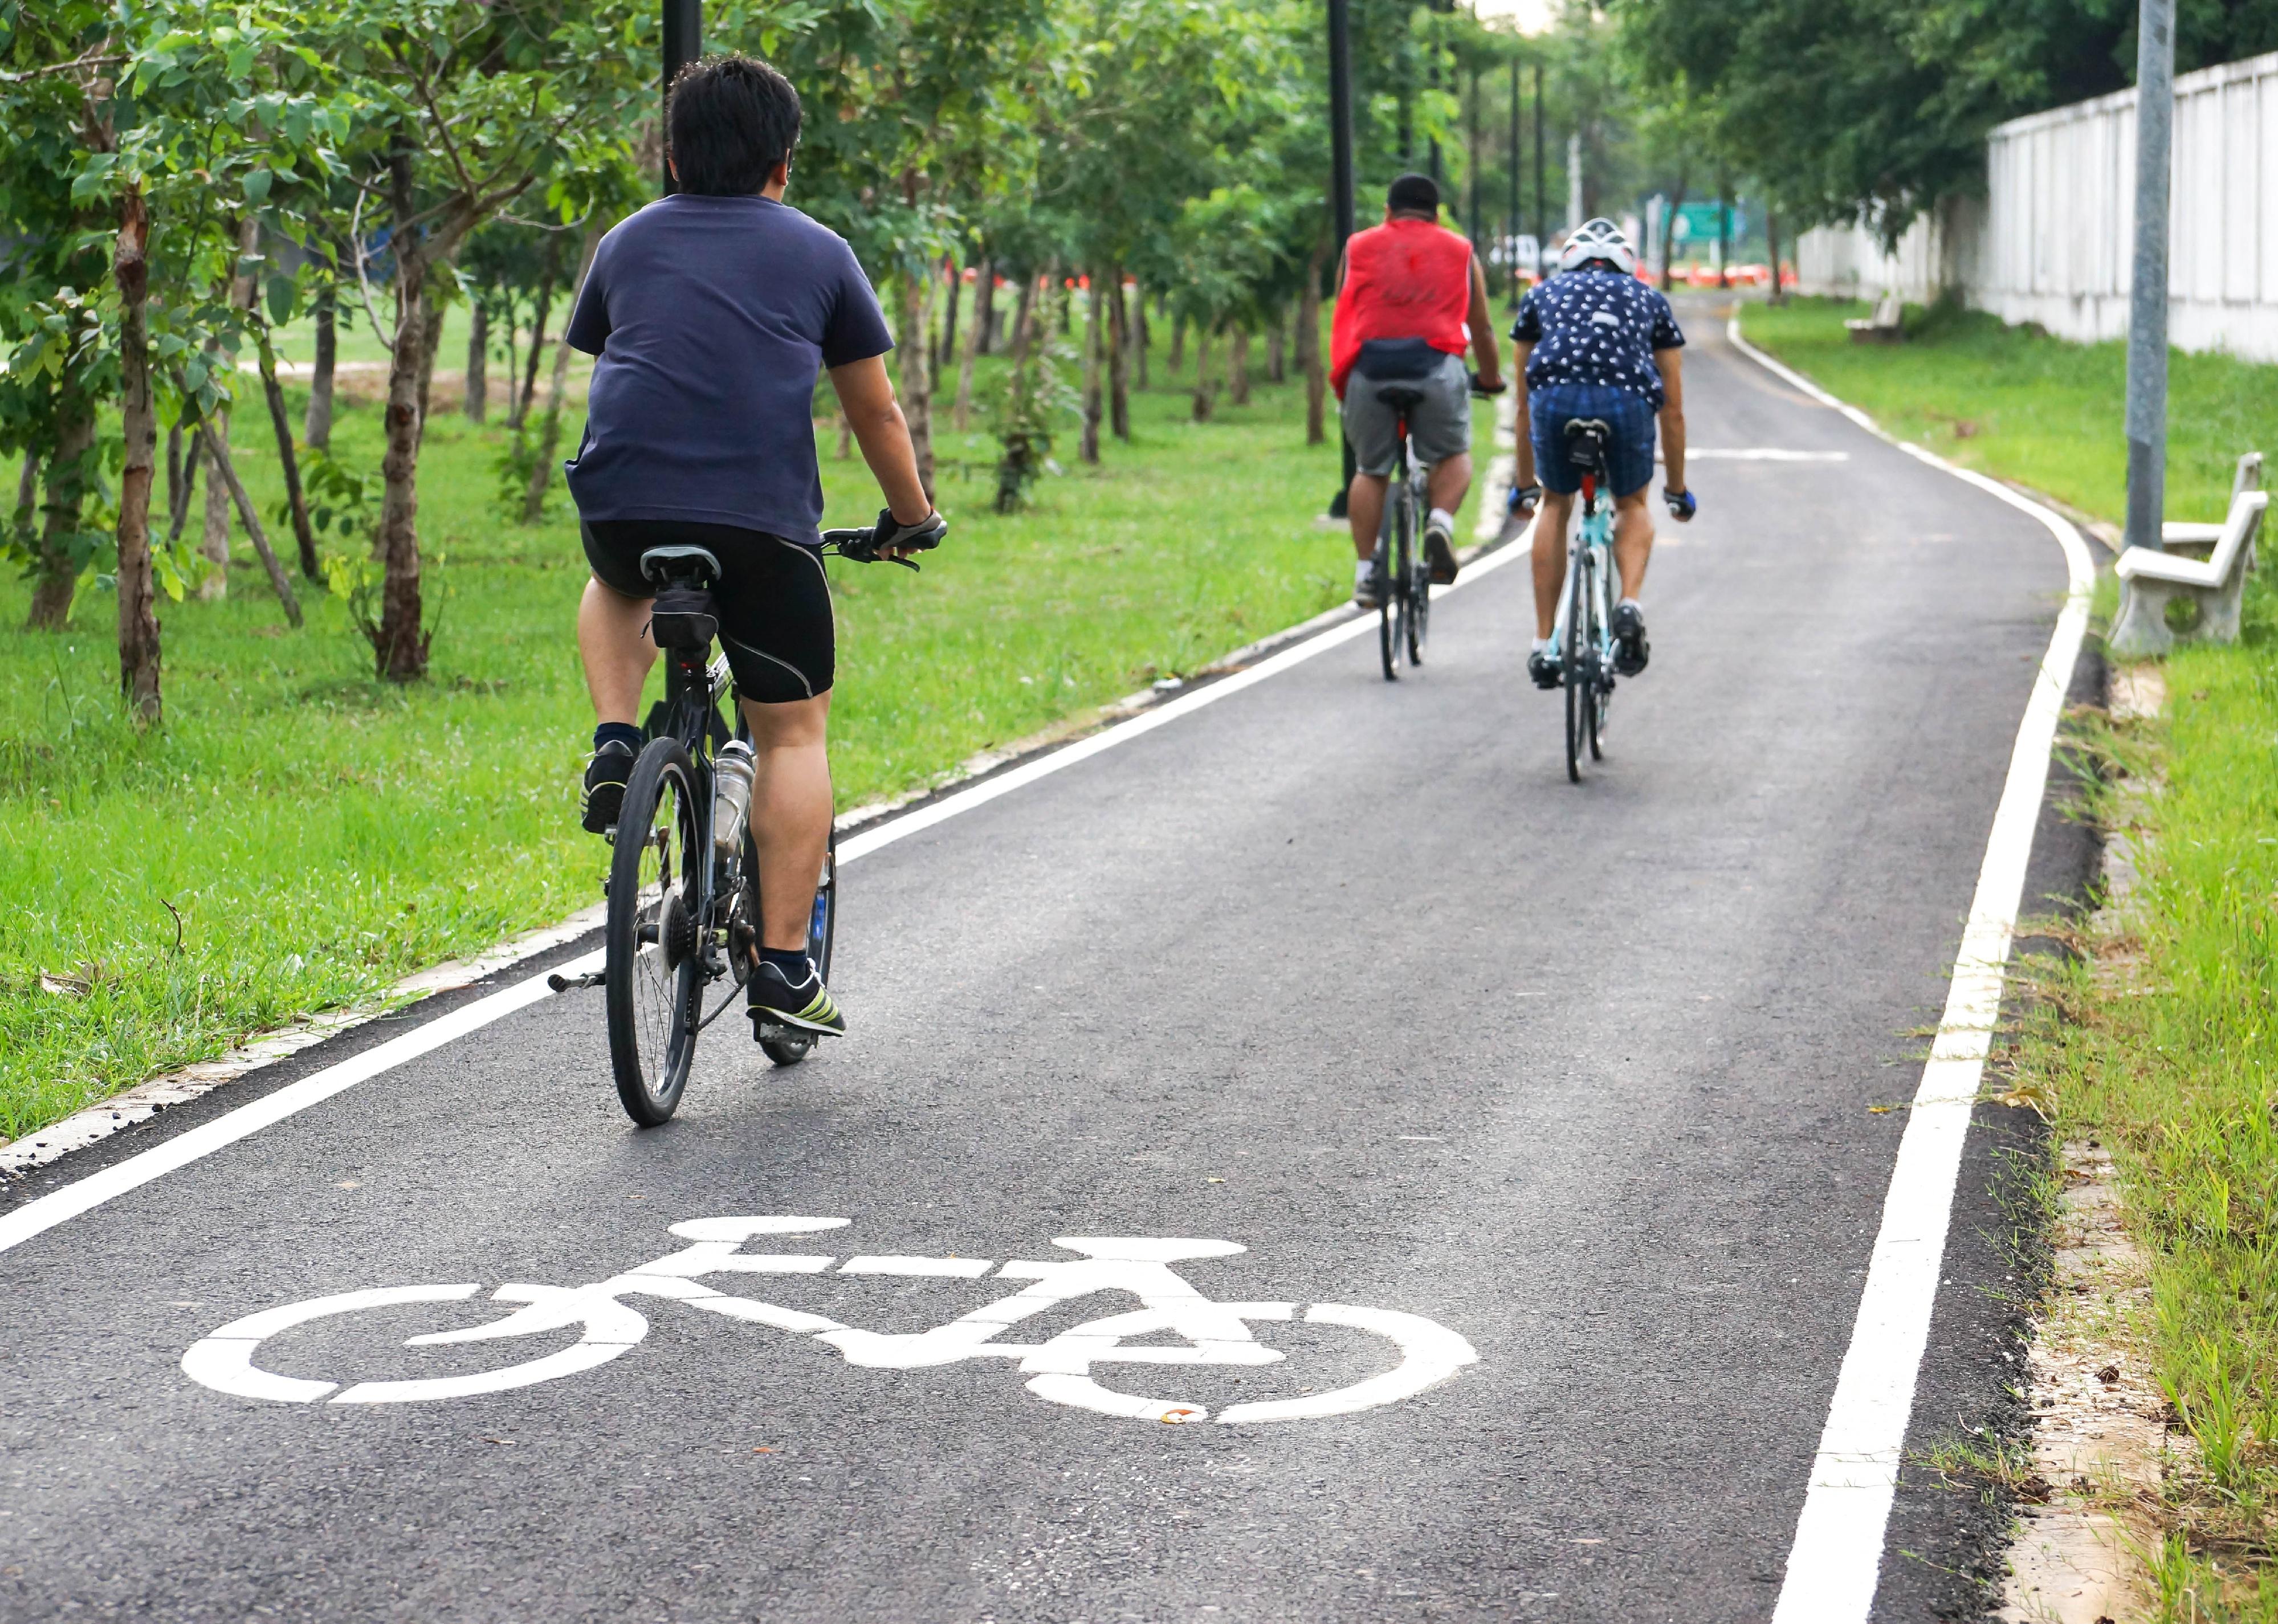 Cyclists ride along a bicycle lane in a park.